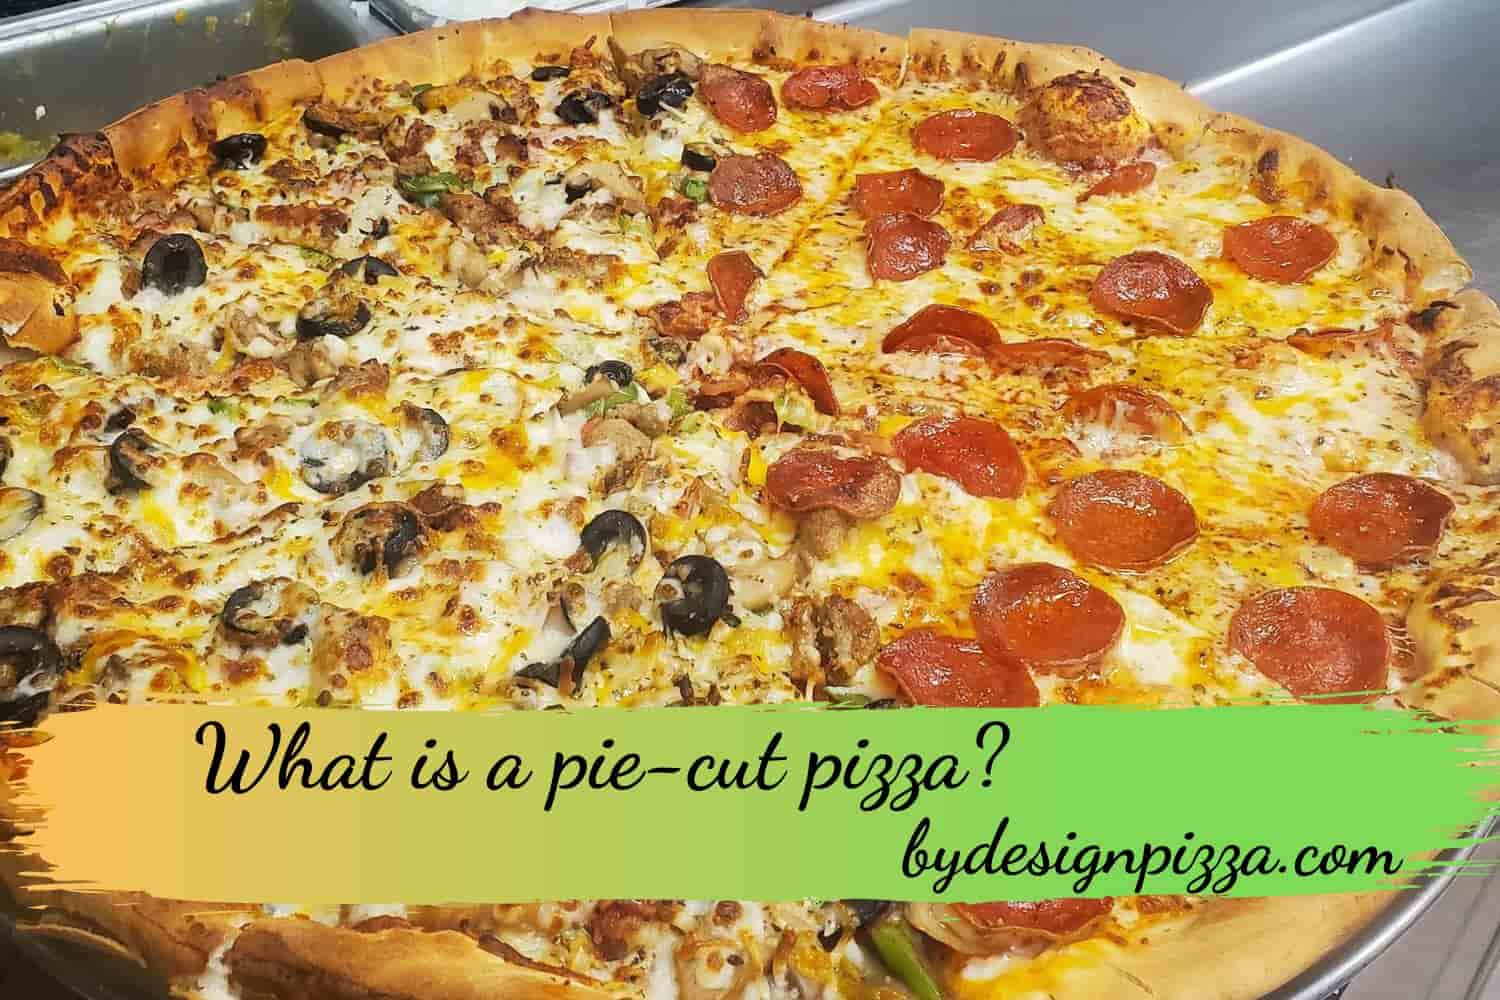 What is a pie-cut pizza?